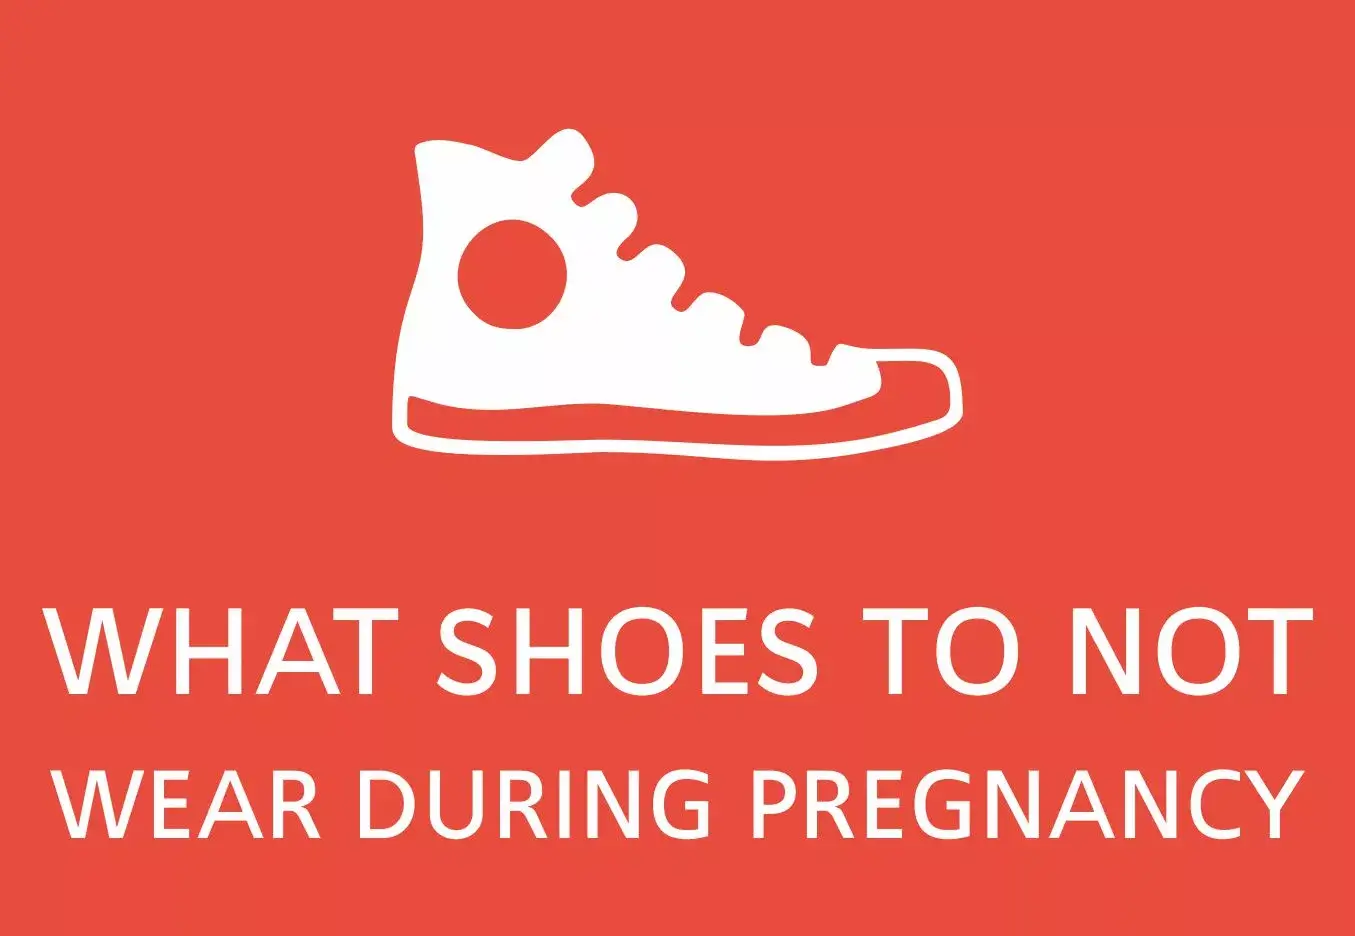 What shoes to not wear during pregnancy 